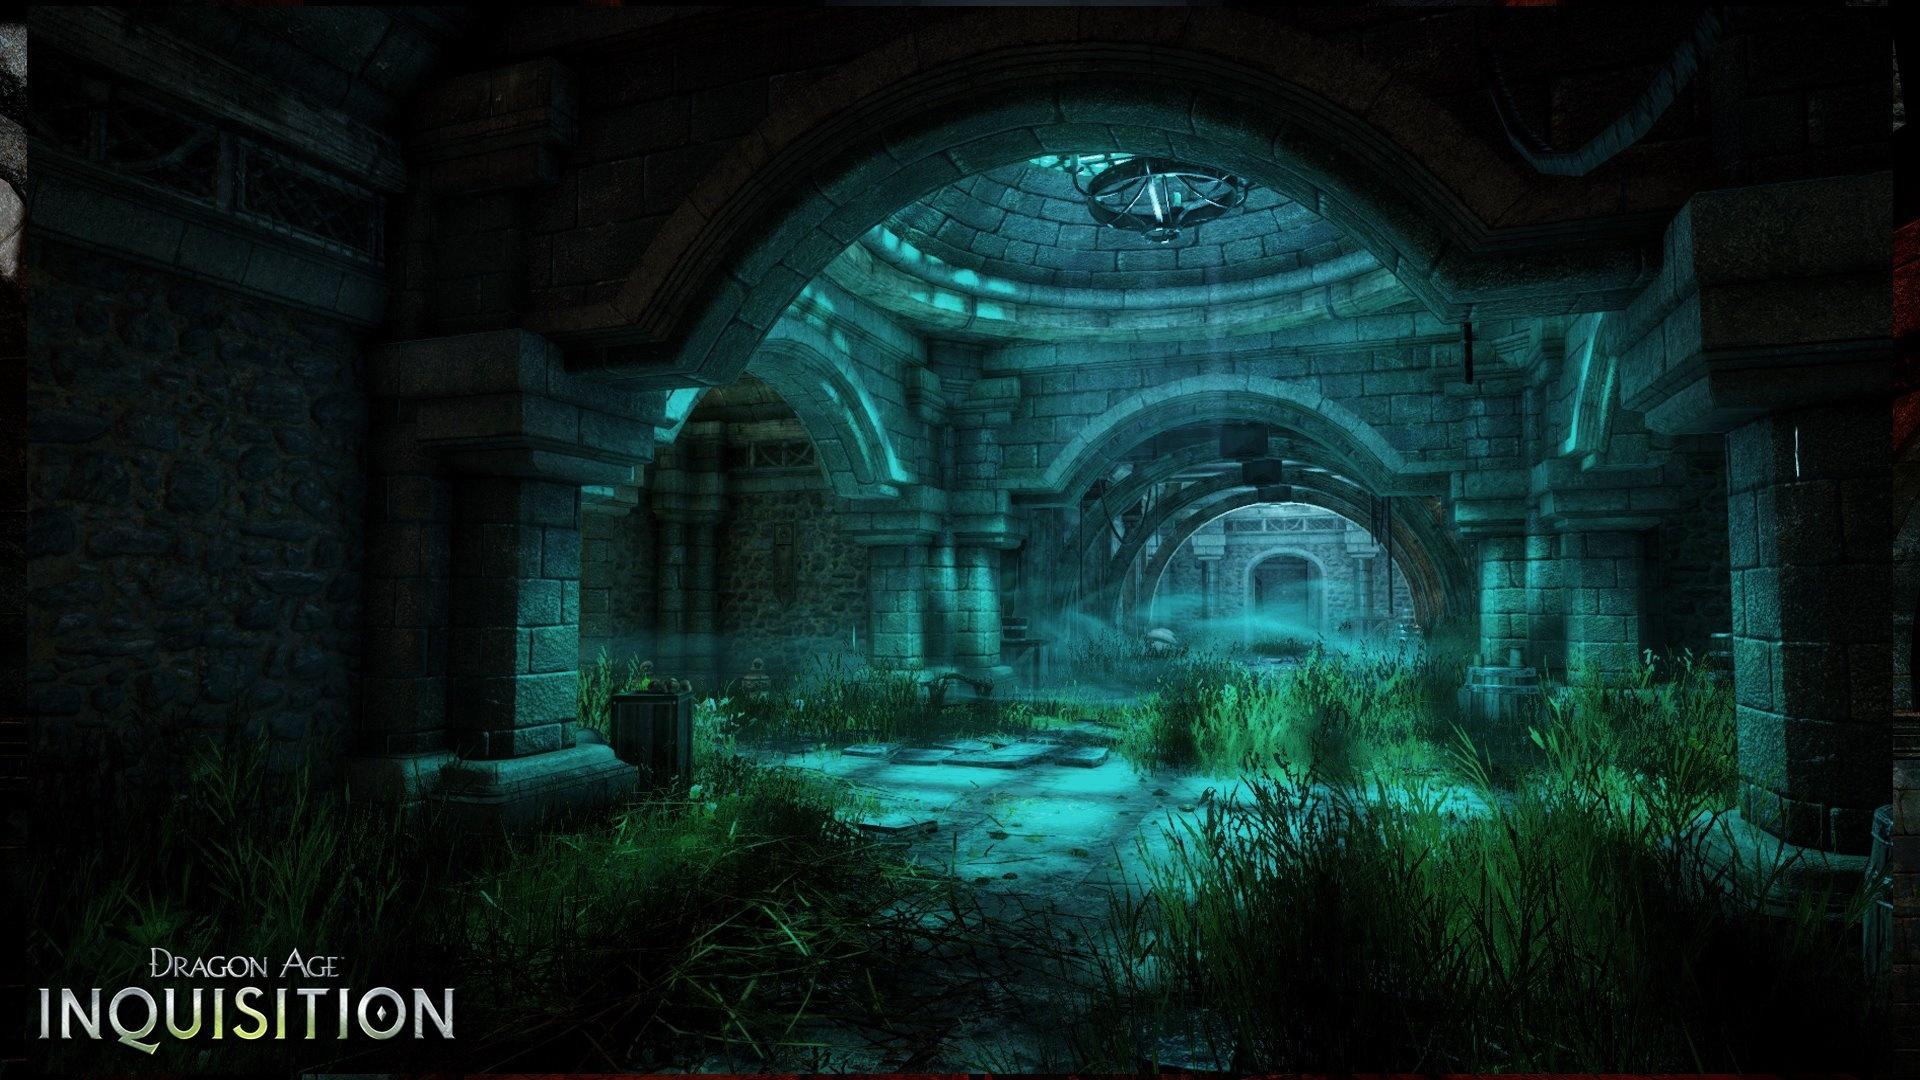  Dragon Age: Inquisition Windows Backgrounds